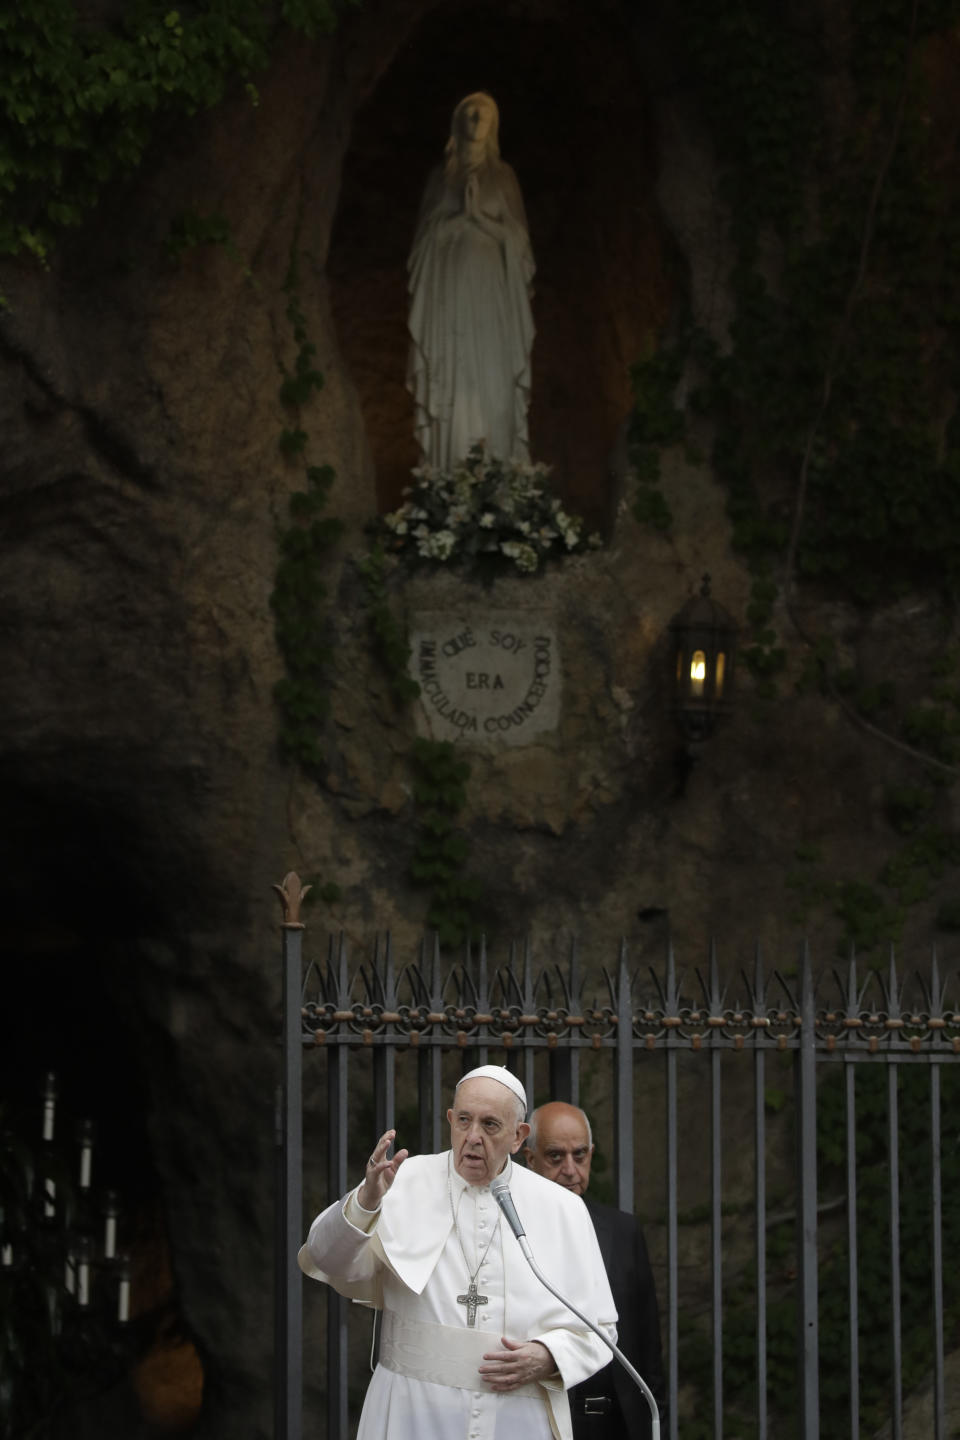 Pope Francis delivers his blessing at the end of a rosary in Vatican gardens Saturday May 30, 2020. In background is a reconstruction of the Lourdes' grotto in southern France, where the Virgin Mary is alleged to have appeared eighteen times to Bernadette Soubirous in 1858. Pope Francis is reciting a special prayer for the end of the coronavirus pandemic surrounded by a representative sampling of people on the front lines in his biggest post-lockdown gathering to date. (AP Photo/Alessandra Tarantino, pool)